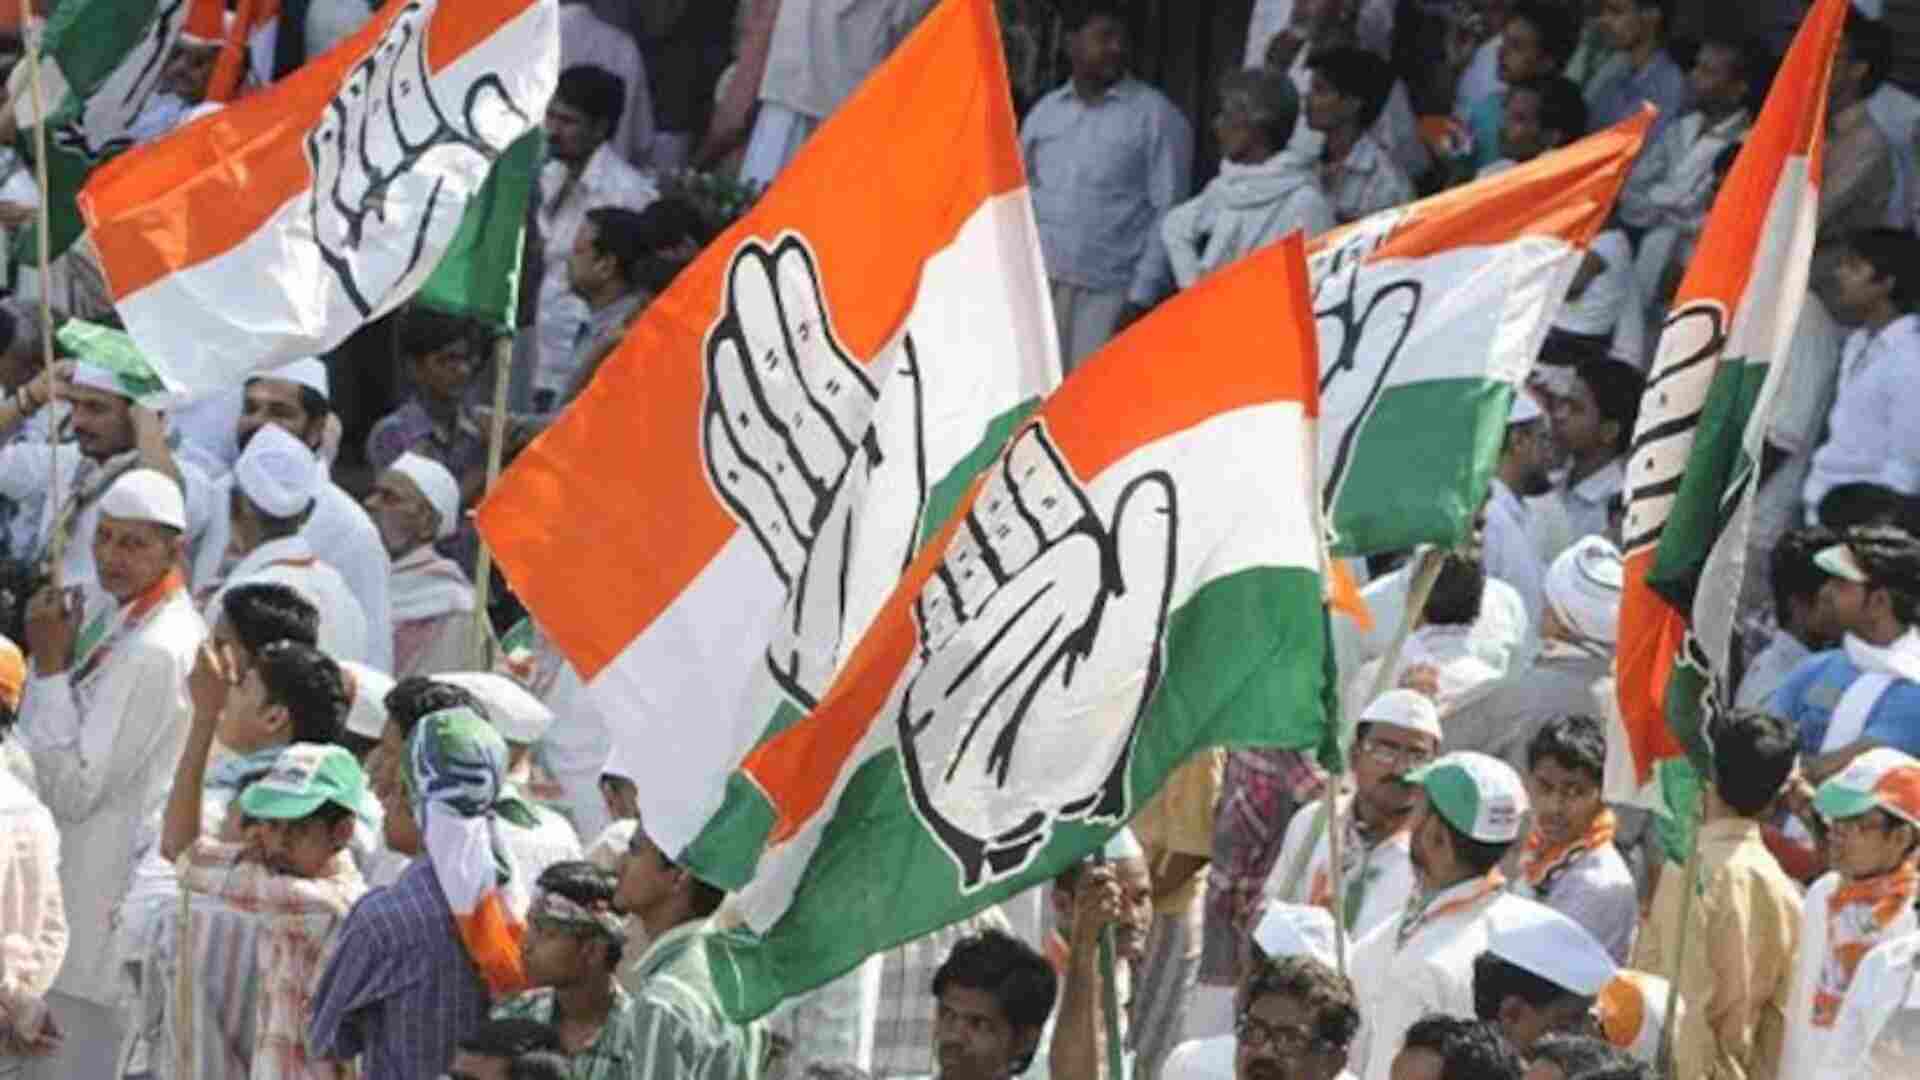 Congress alleges ‘state sponsored’ terrorism in North East